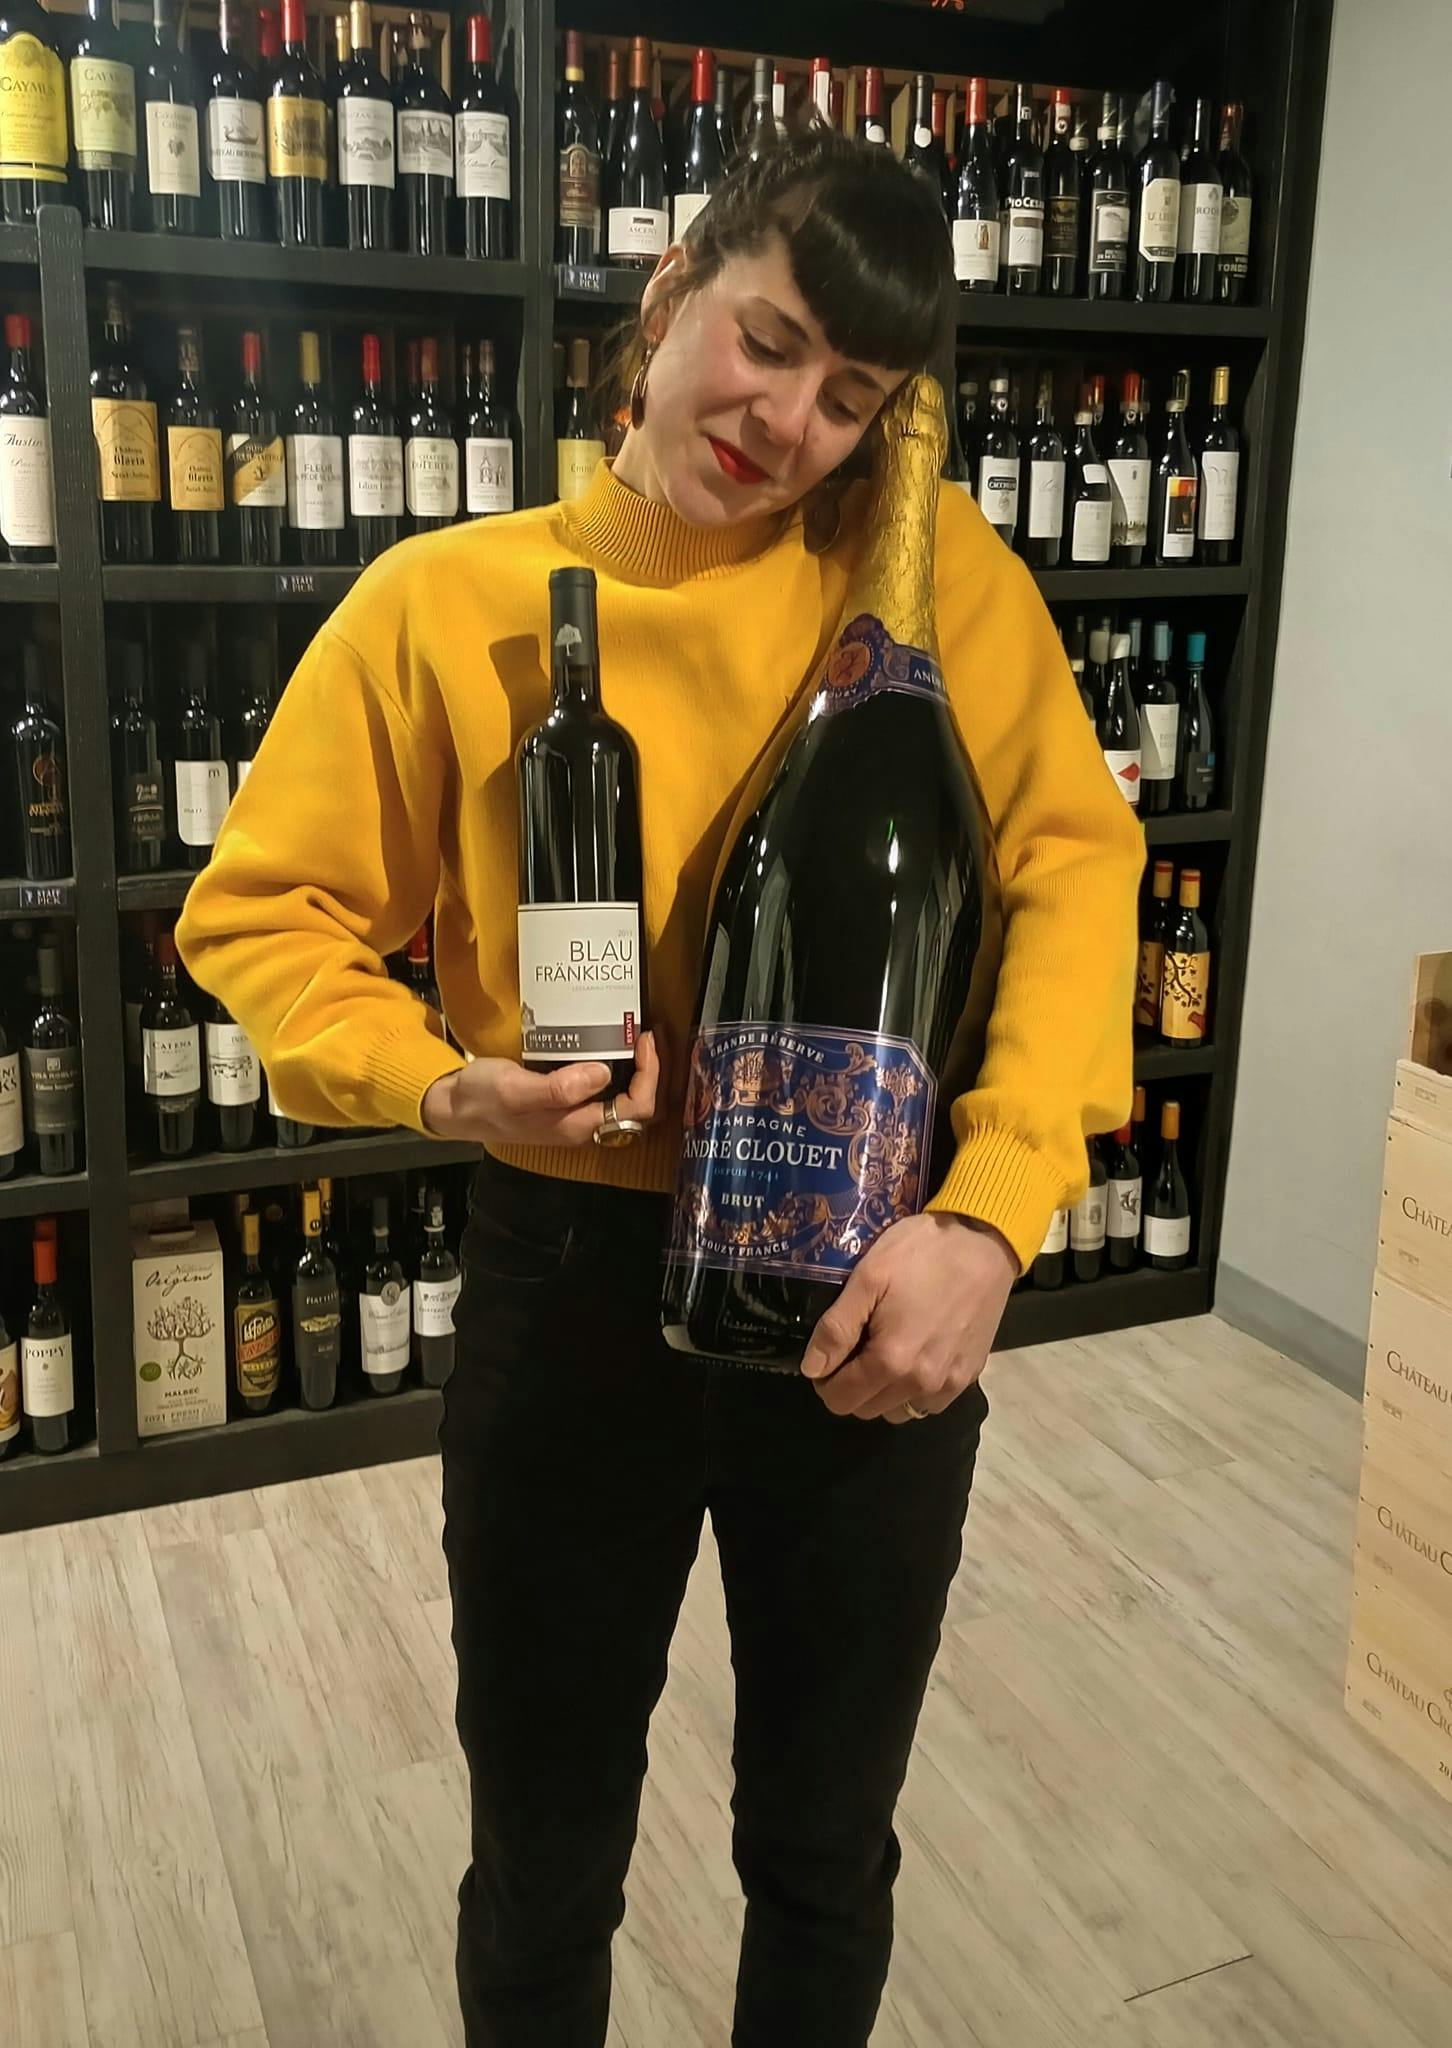 Candace holding a regular sized bottle of wine, as well as a very large bottle of wine.